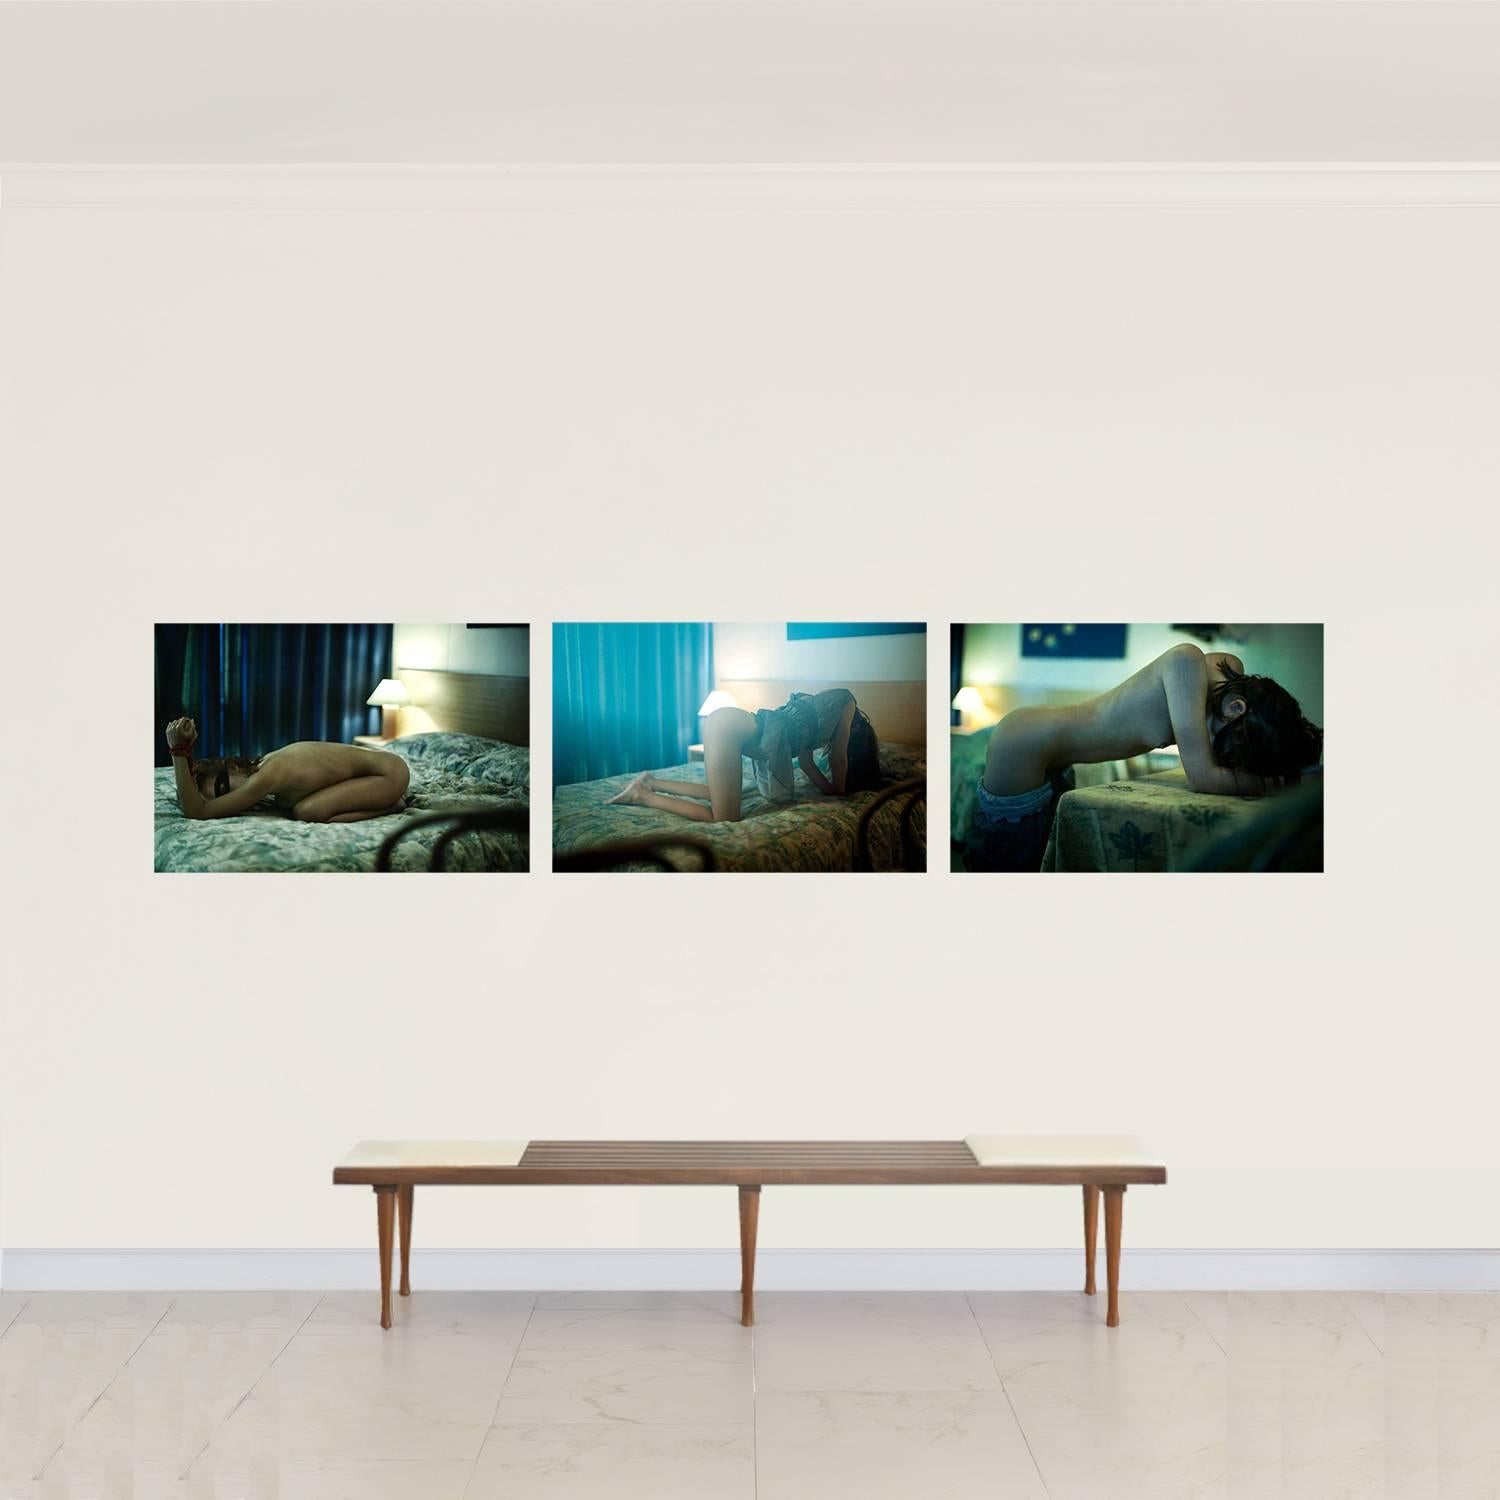 Hotel Bondi #3, #4 & #5 - Triptych
24 in. H x 36 in. W (each)
Archival Pigment Print
2012
Hotel Bondi is a series by photographer David Jay exclusive to Art Design Project. Jay’s photography has been exhibited at galleries and museums worldwide.